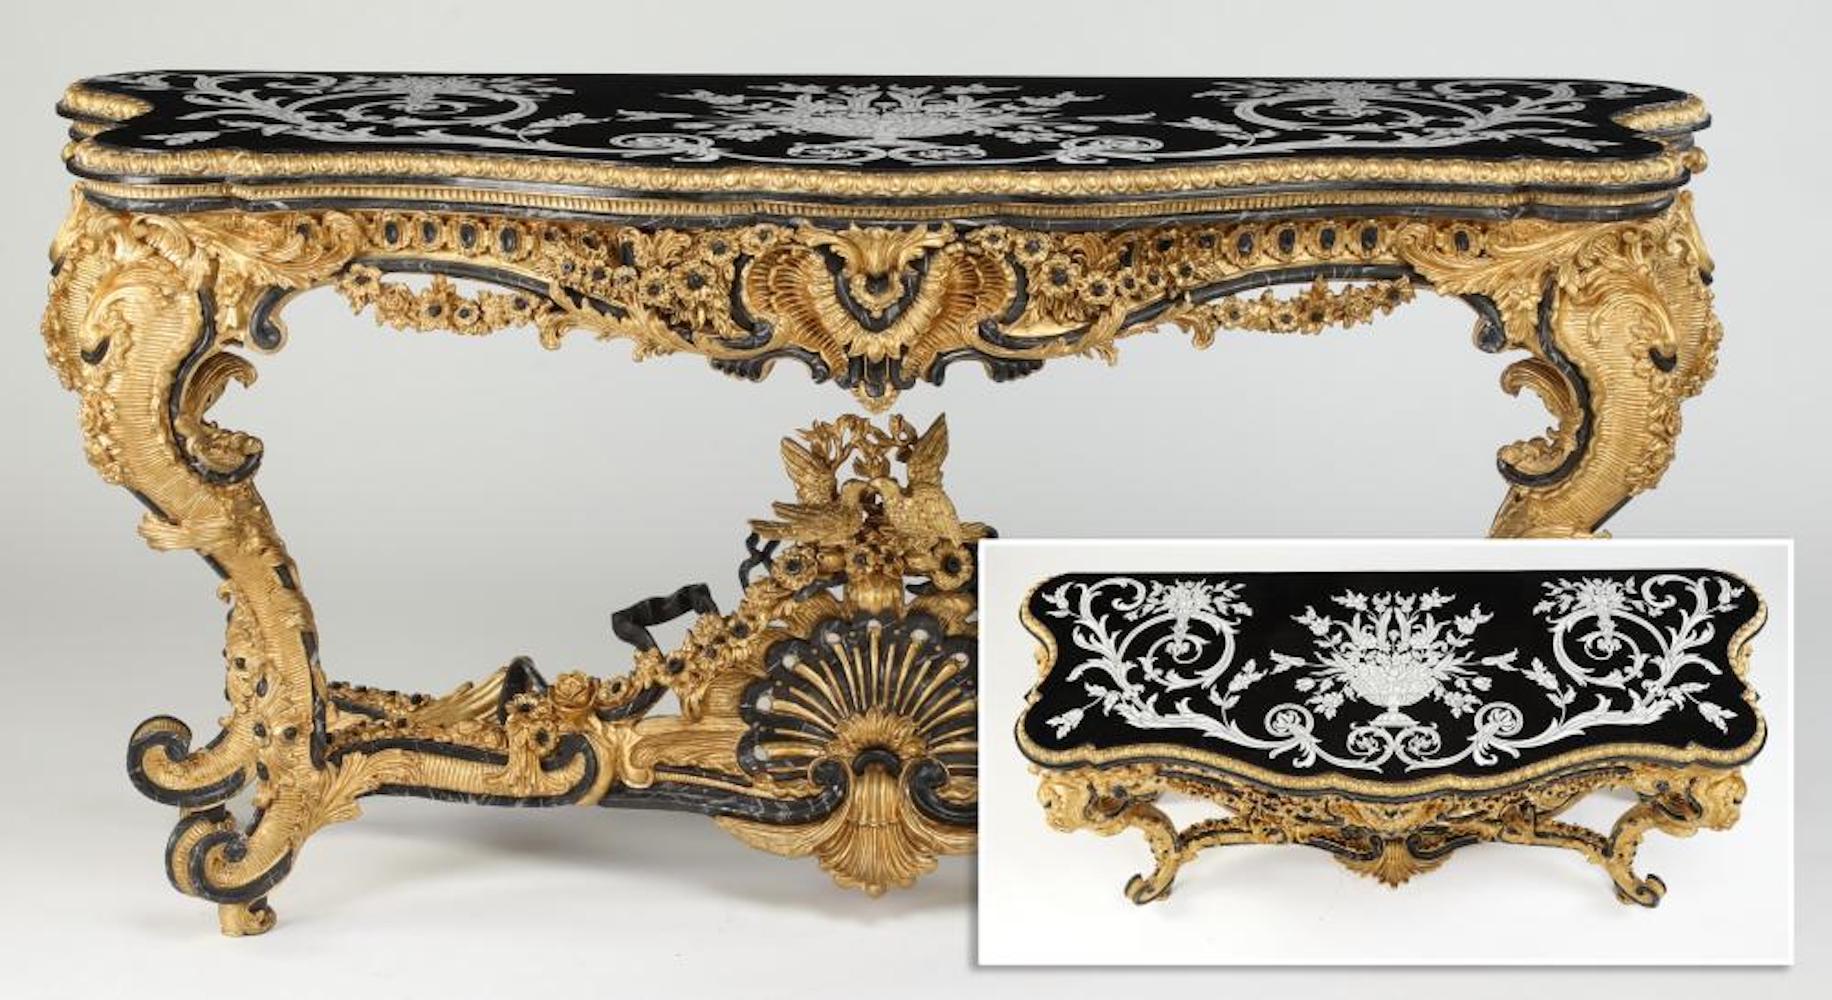 Elaborately carved and gilded Italian console in the Rococo taste, the shaped black marble top centering an inlay of a flower-filled urn flanked by rocaille scrollwork and trailing blossoms, above the gilded and paint decorated apron centering a